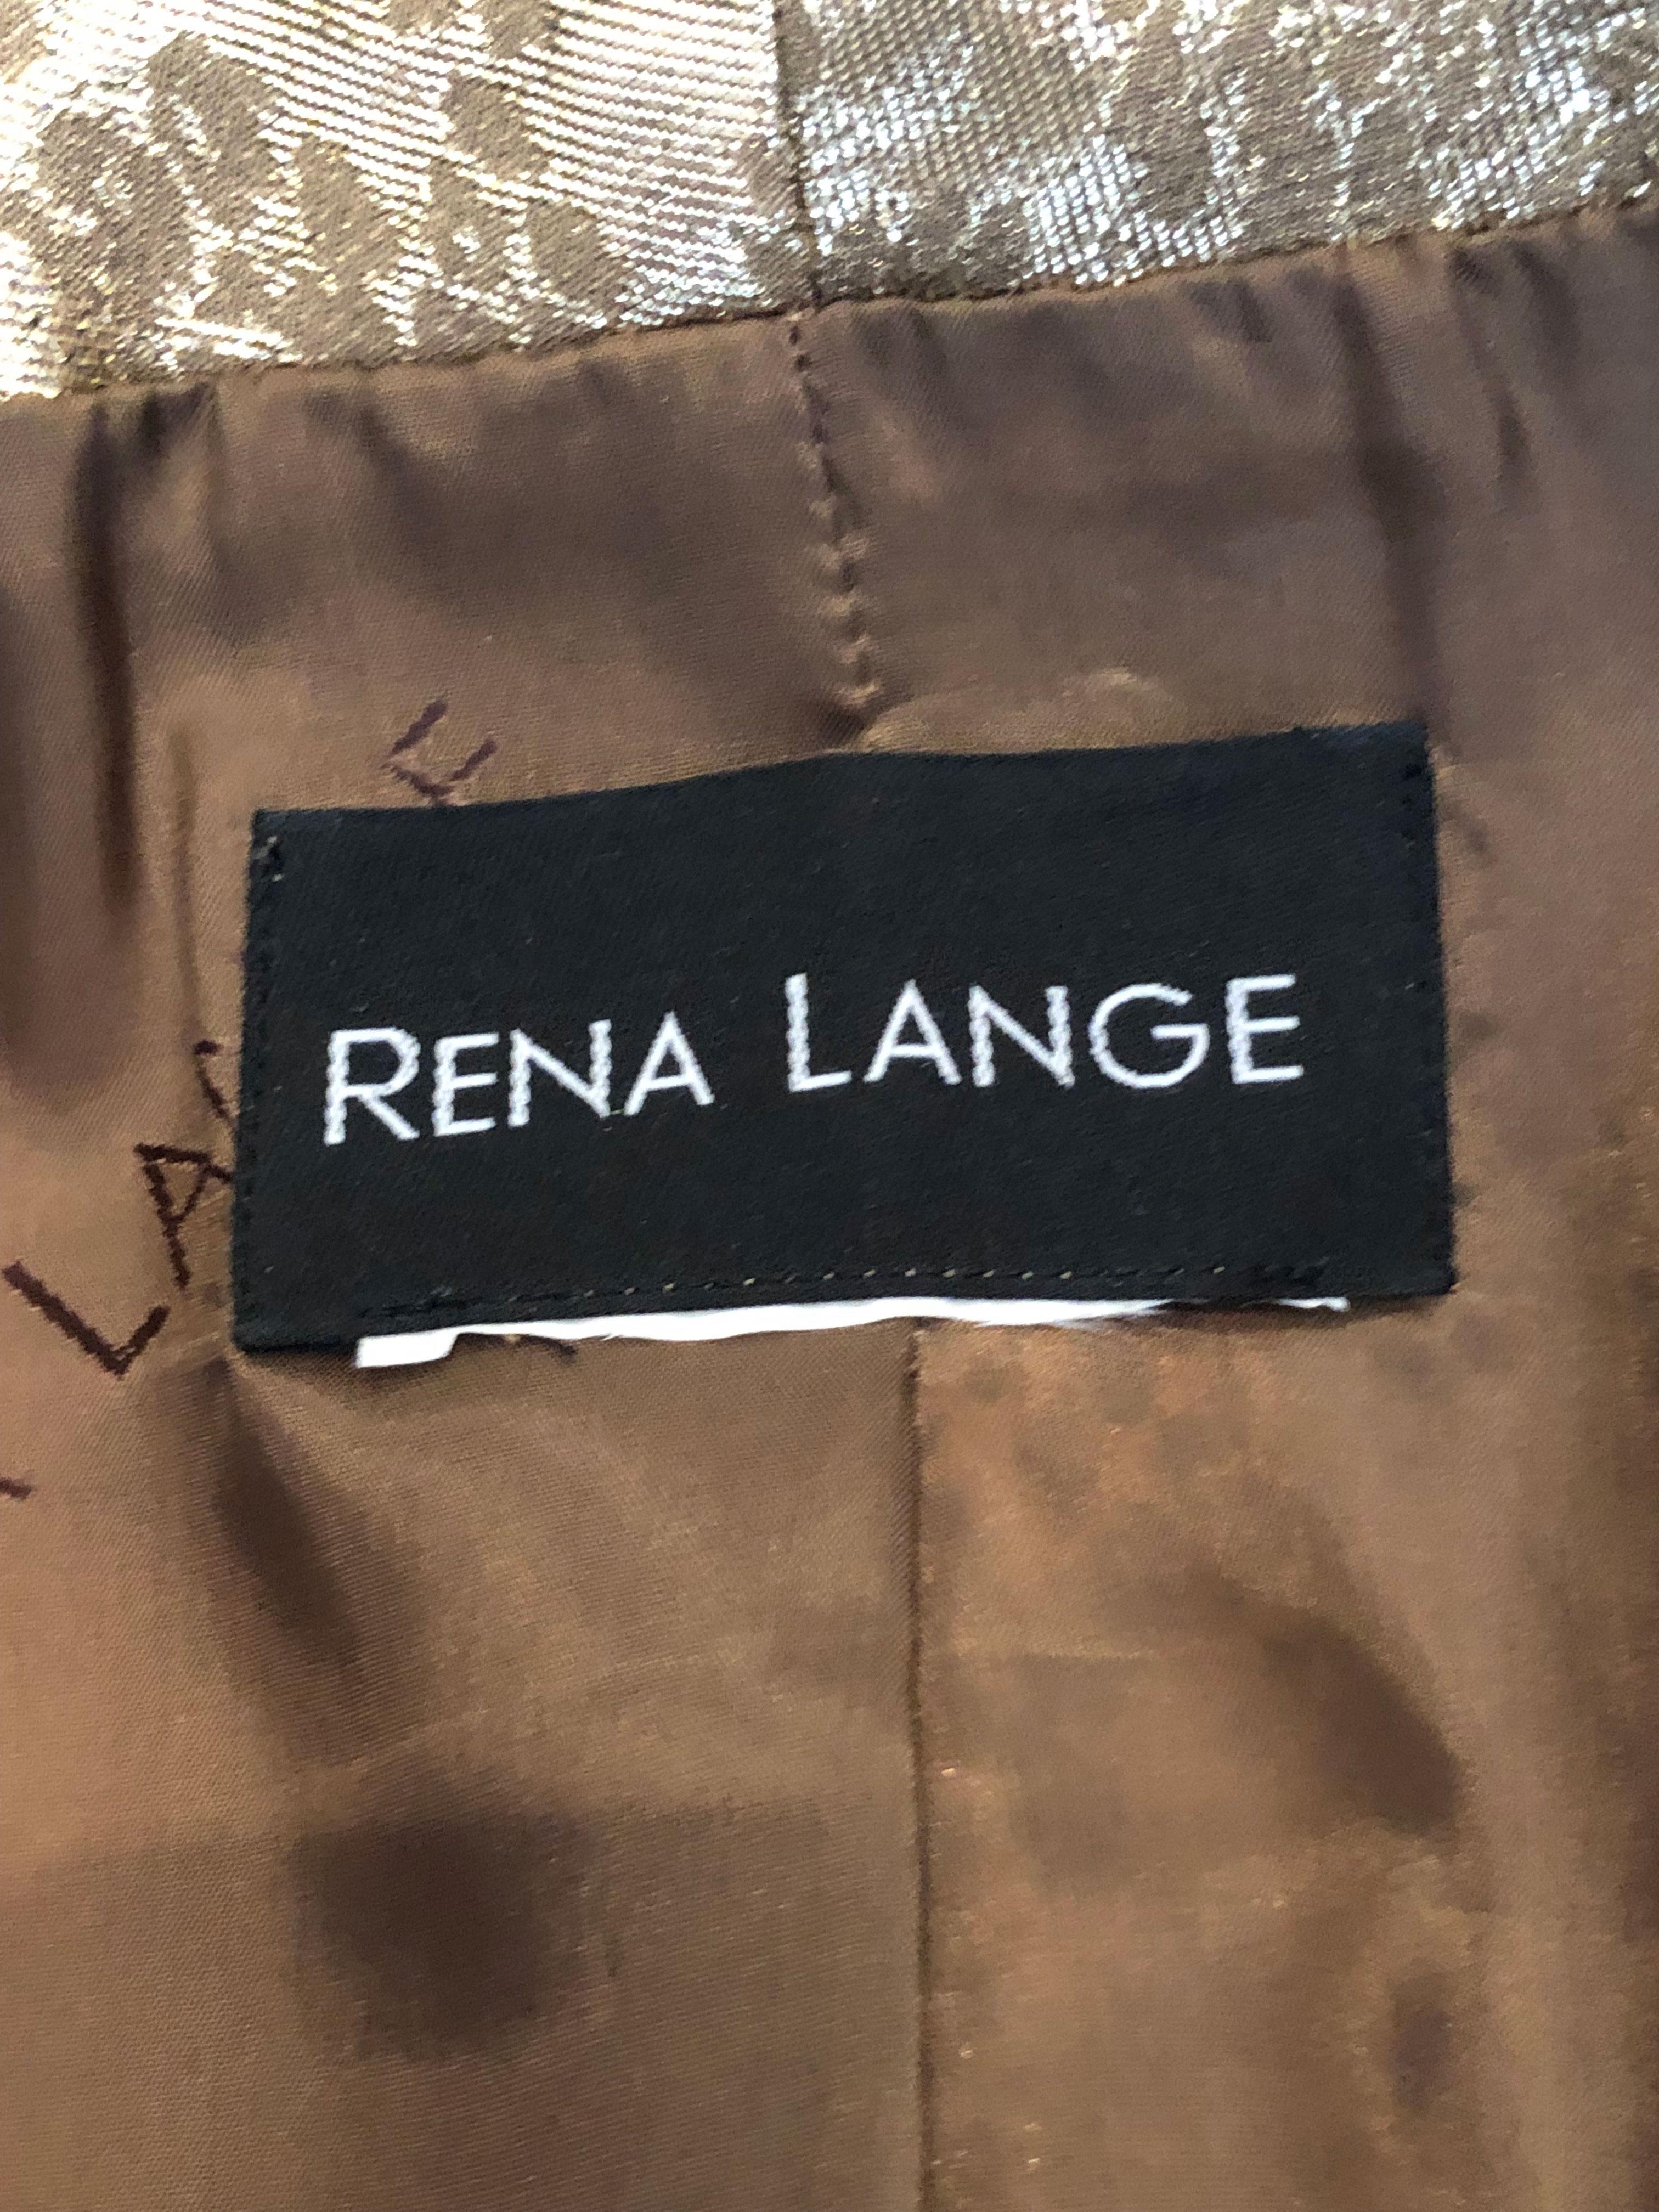 A real statement suit by Rena Lange. The suit jacket is sfari style with four pockets  and the fabric has a snakeskin print detail. Both the trousers and jacket are fully lined. Measurements : Jacket bust 39'', length 30''. Trousers, waist 27'',